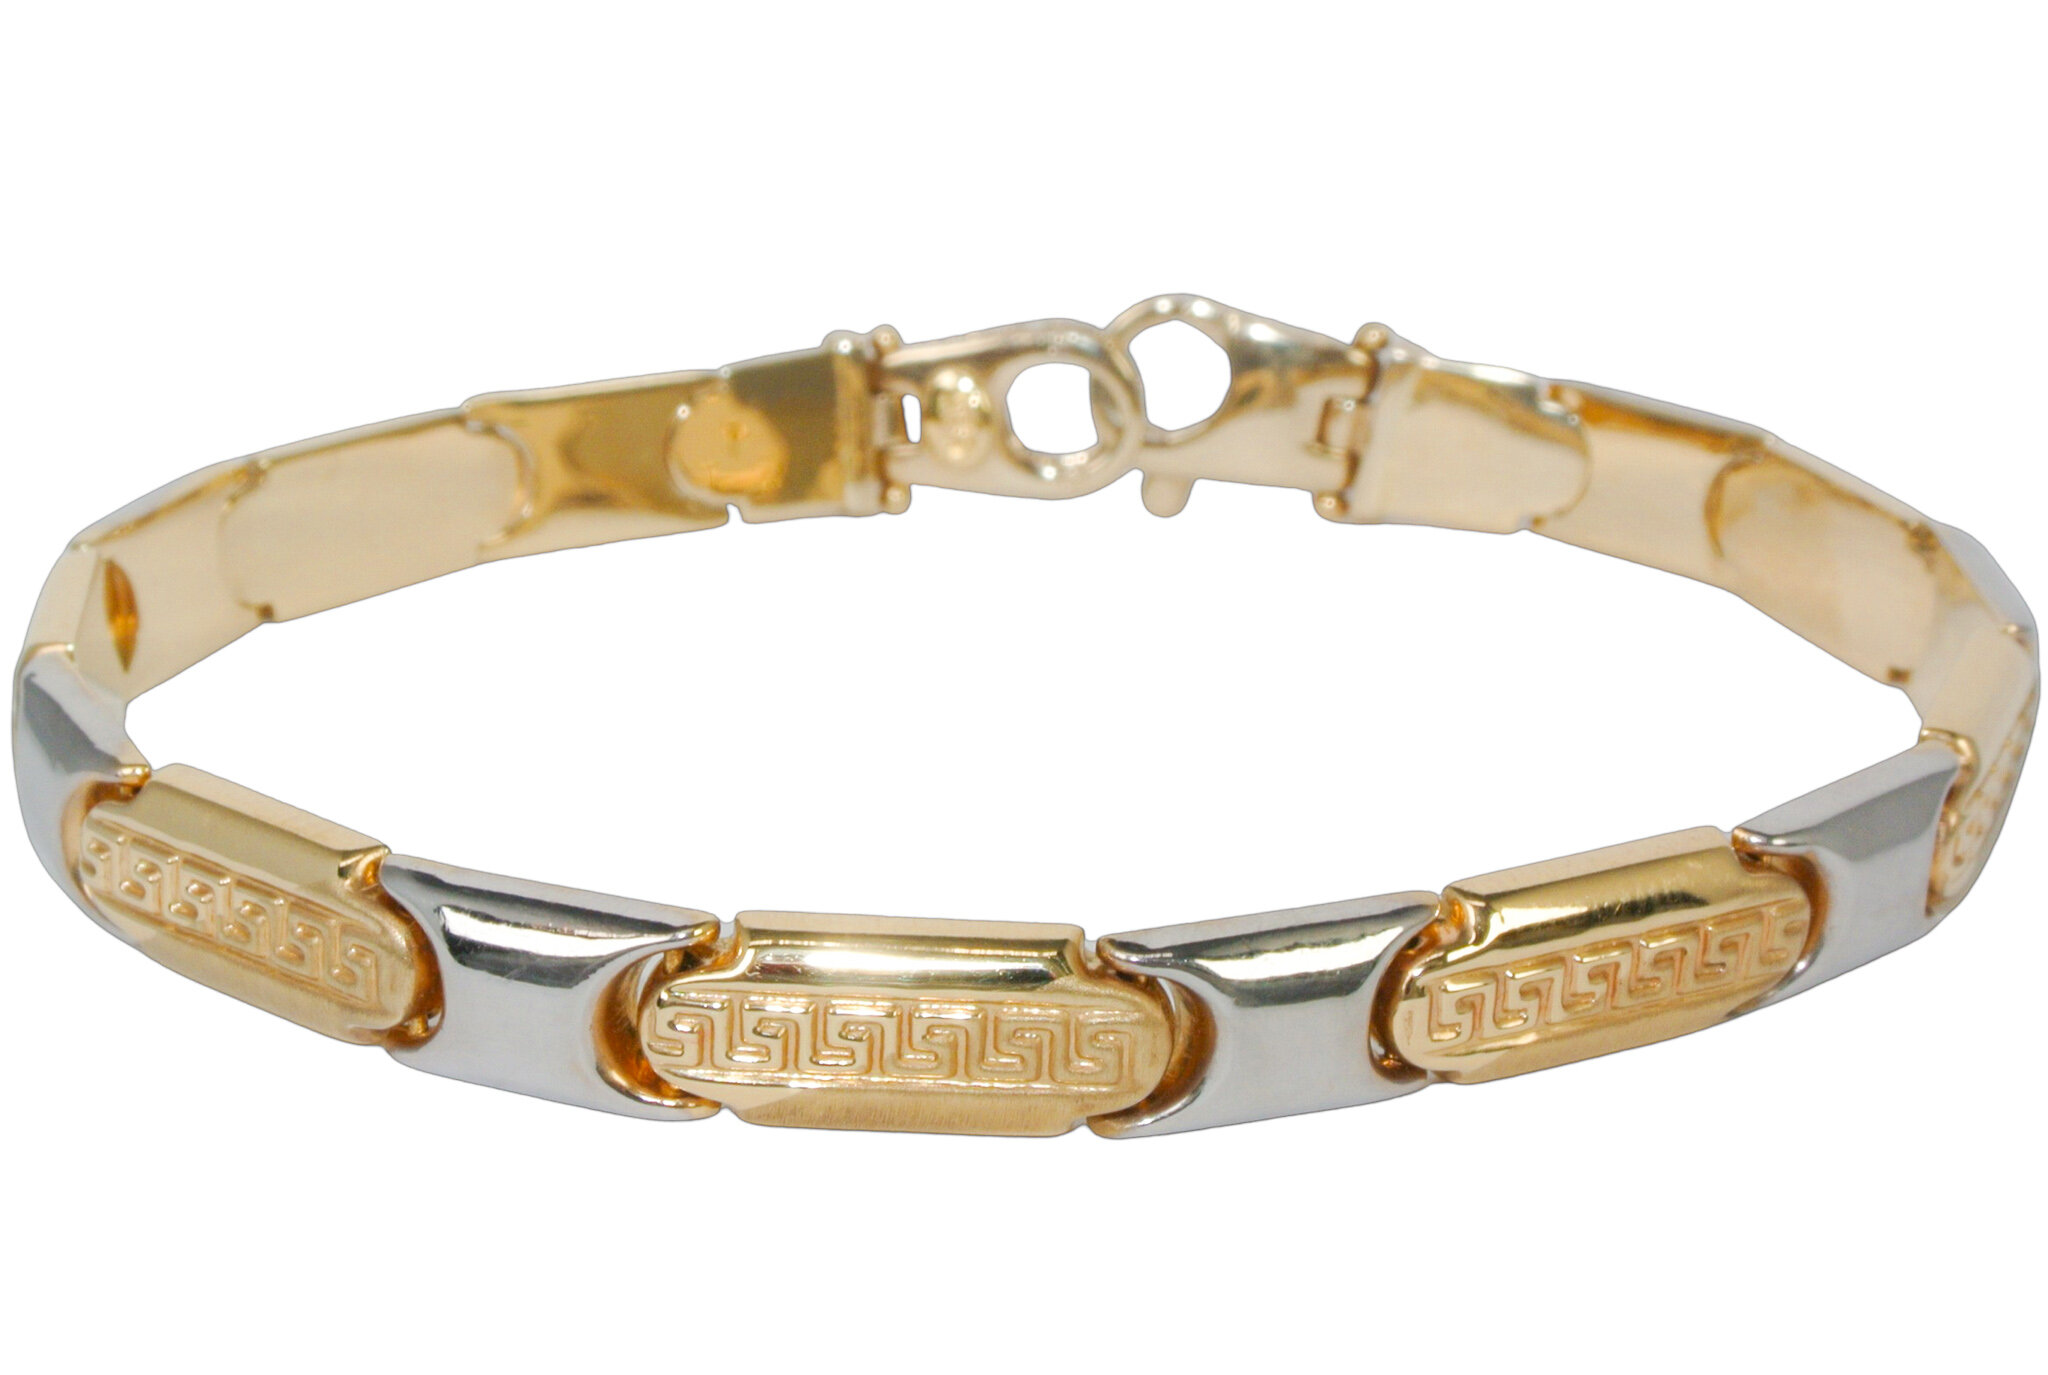 Solid two-tone gold bracelet with an antique pattern